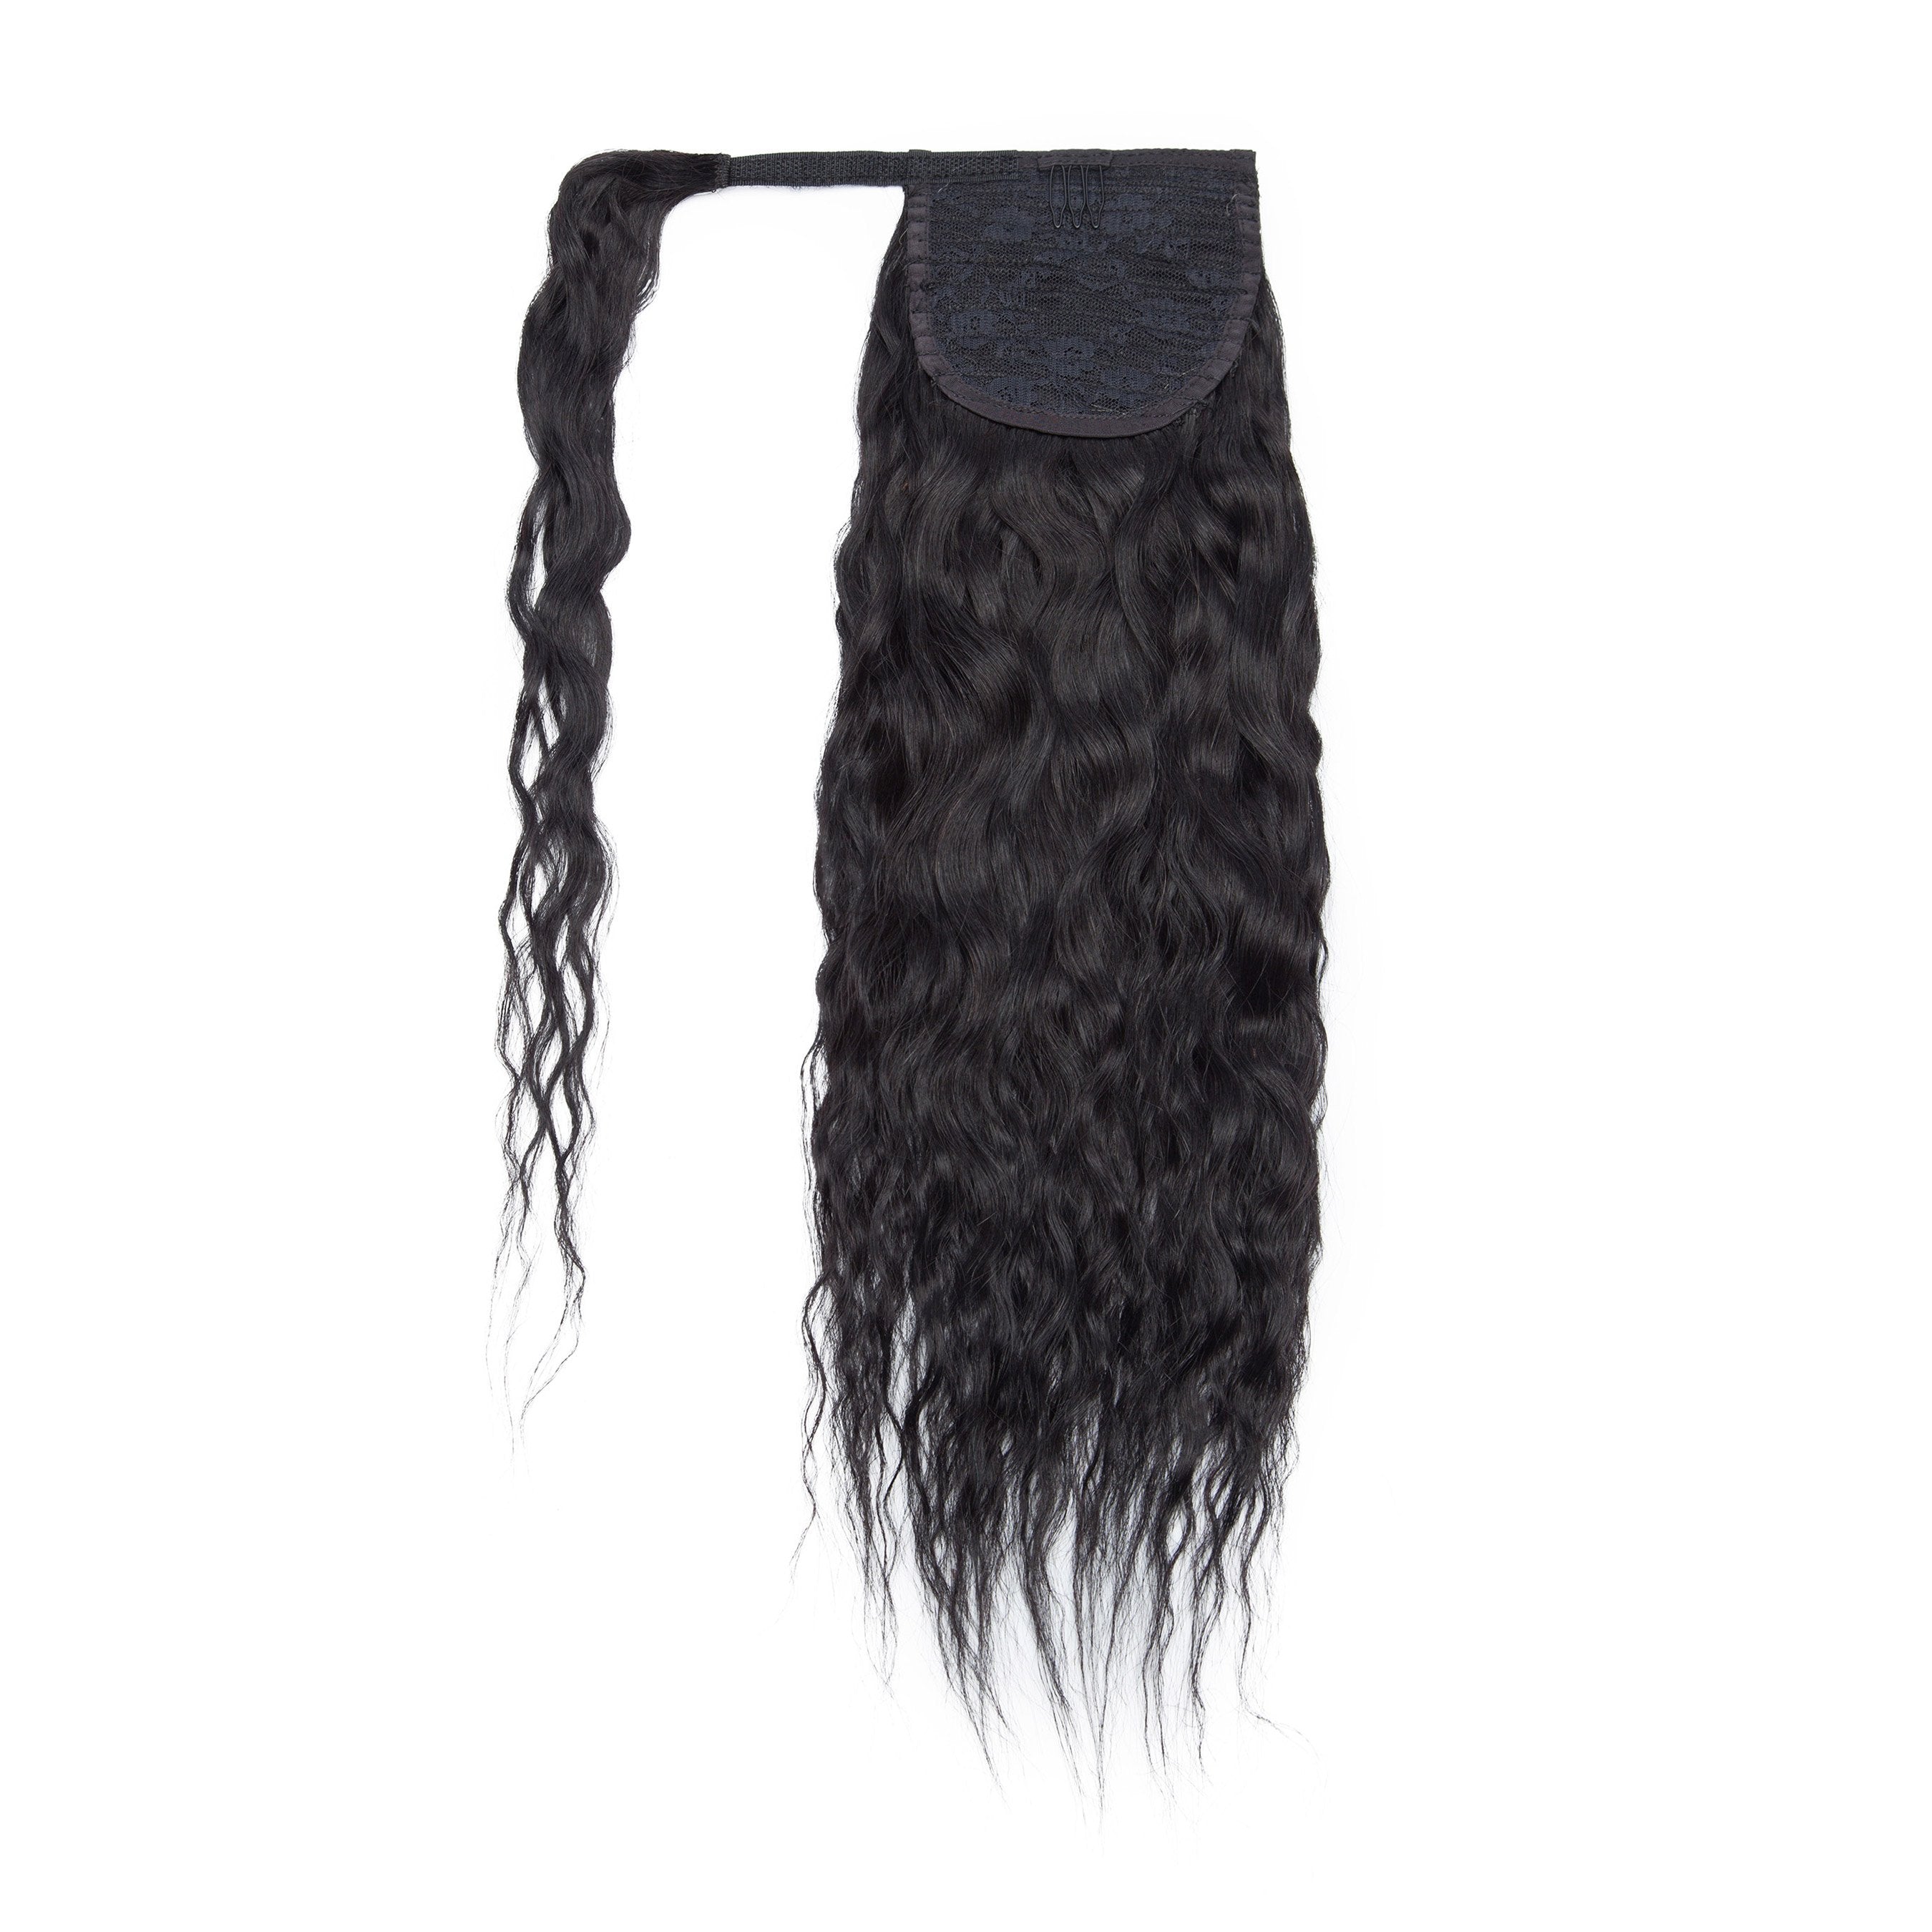 Long Wavy Wrap Around Clip In Ponytail Human Hair Extension Hairpiece for Women